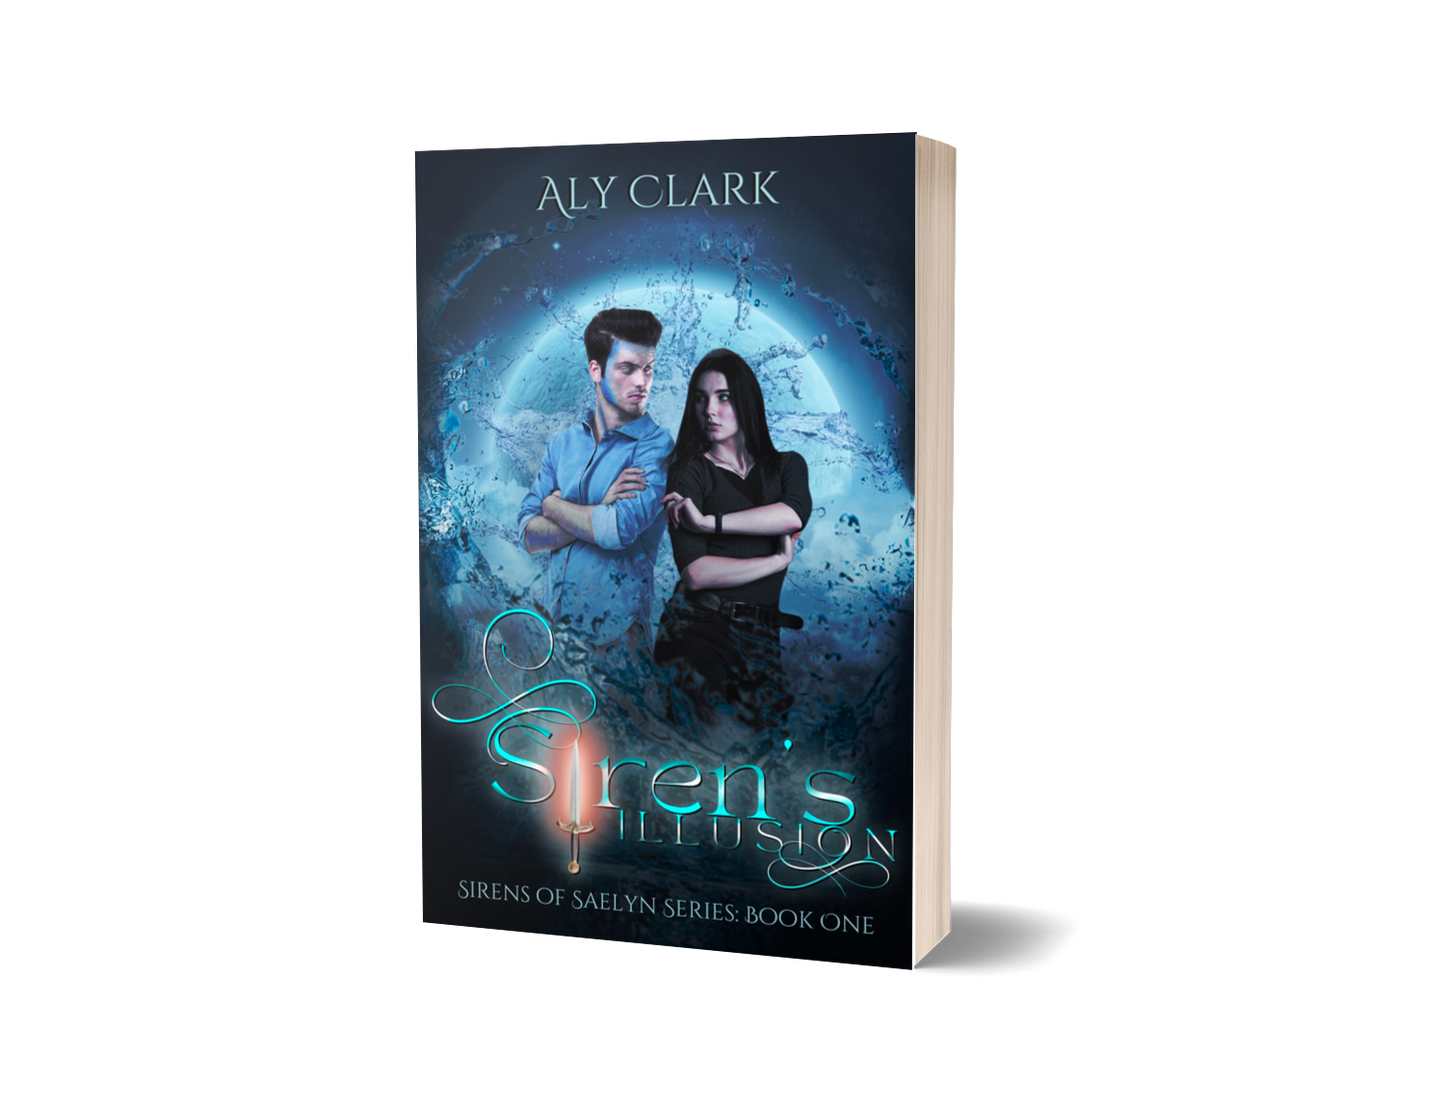 Paperback: Siren's Illusion (Sirens of Saelyn #1)